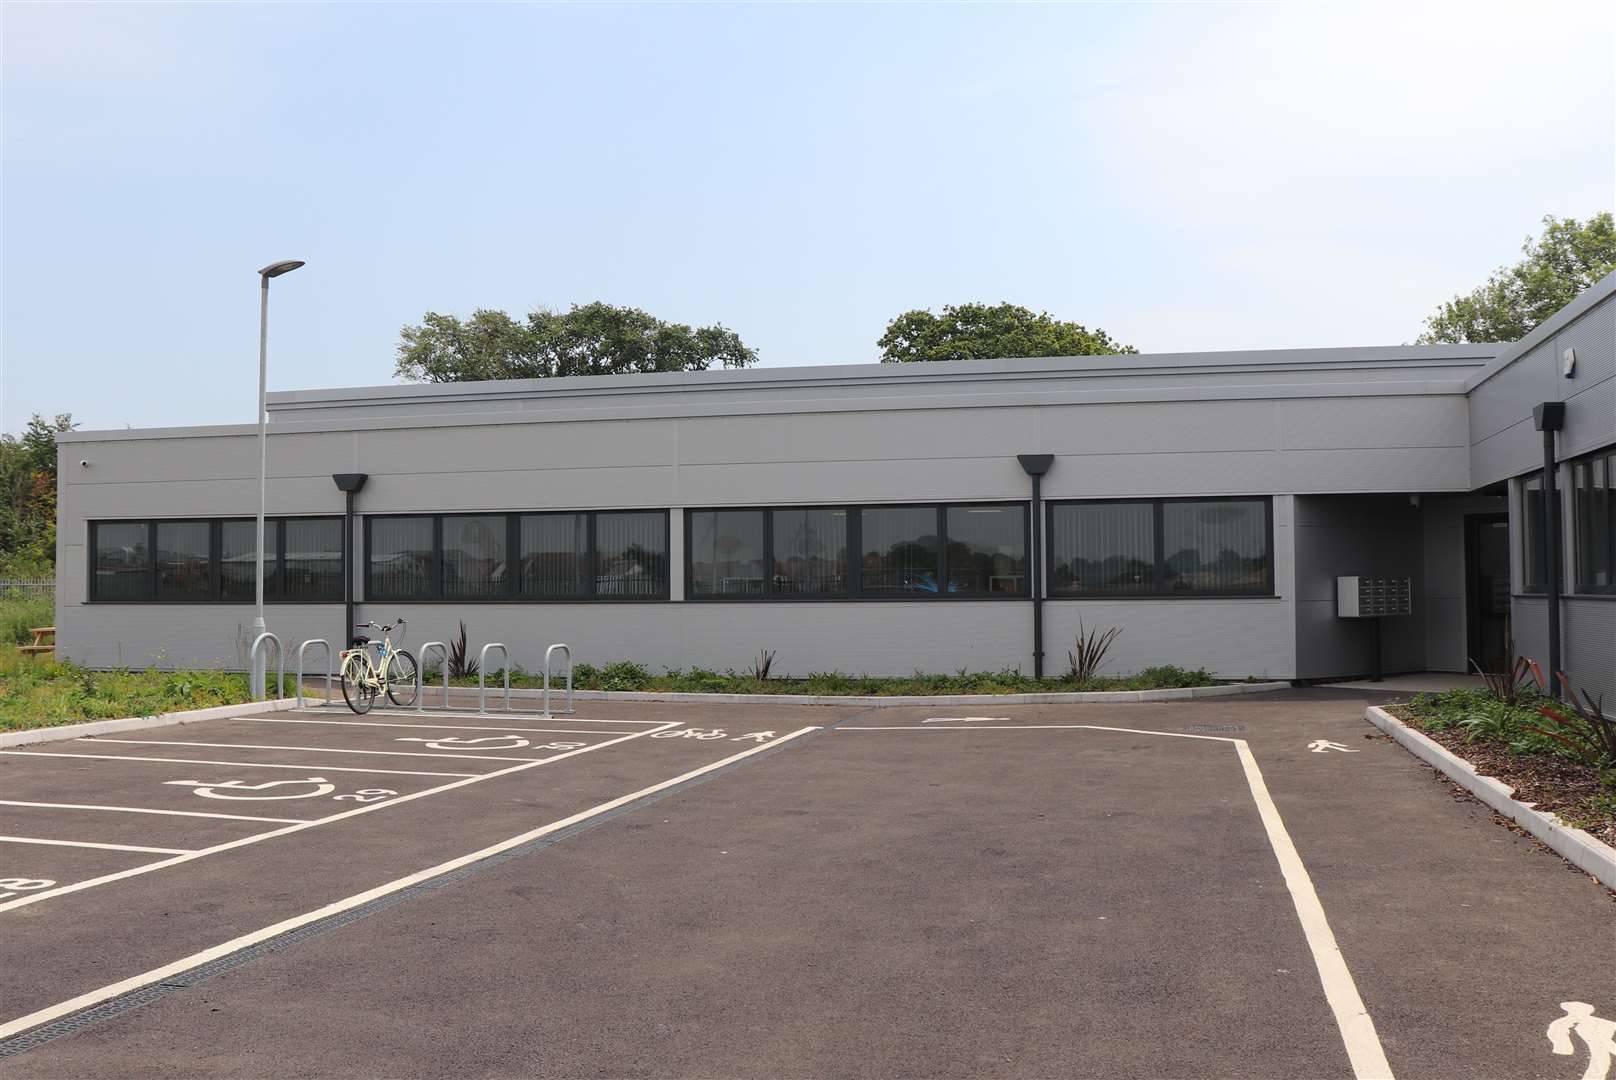 The site has welcomed businesses including Coastal Promotions and Stephen Hill Mid-Kent. Picture: FHDC